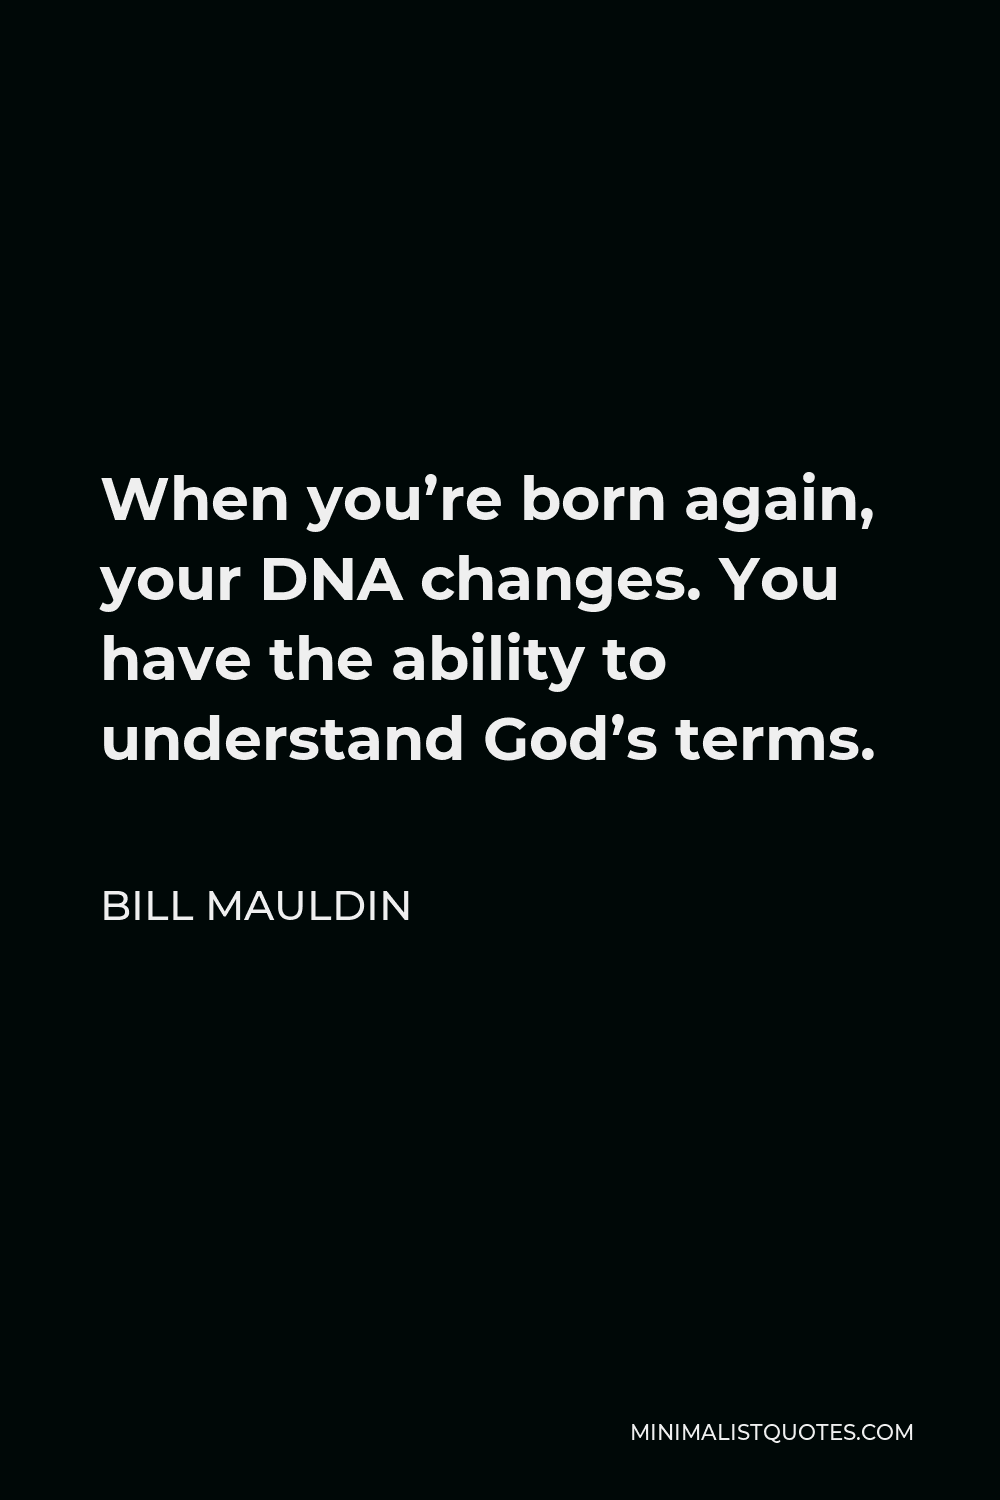 Bill Mauldin Quote - When you’re born again, your DNA changes. You have the ability to understand God’s terms.